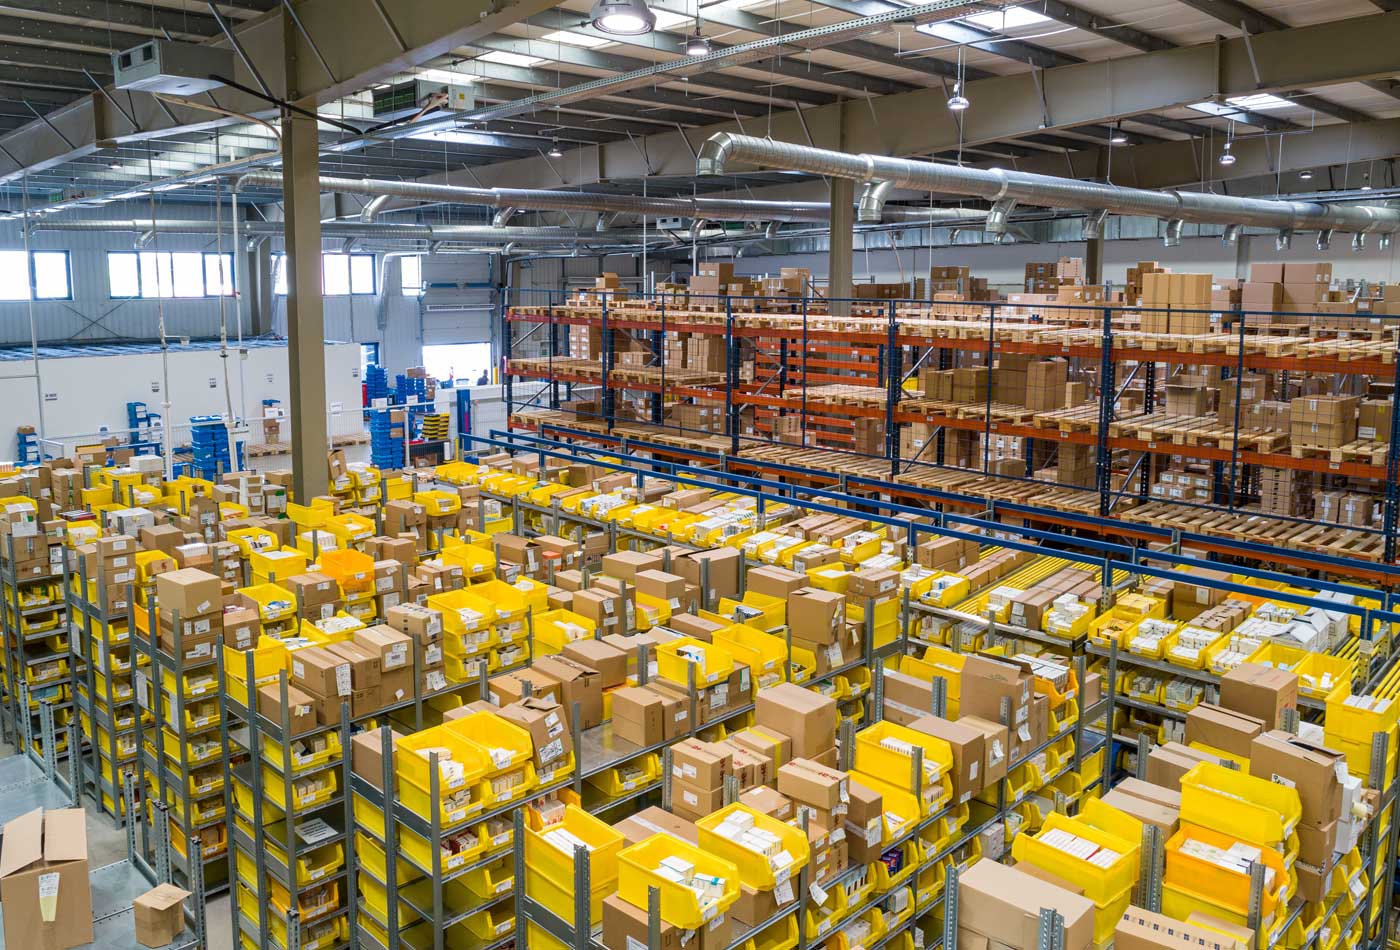 How to start a courier business - Shows the inside of a large warehouse